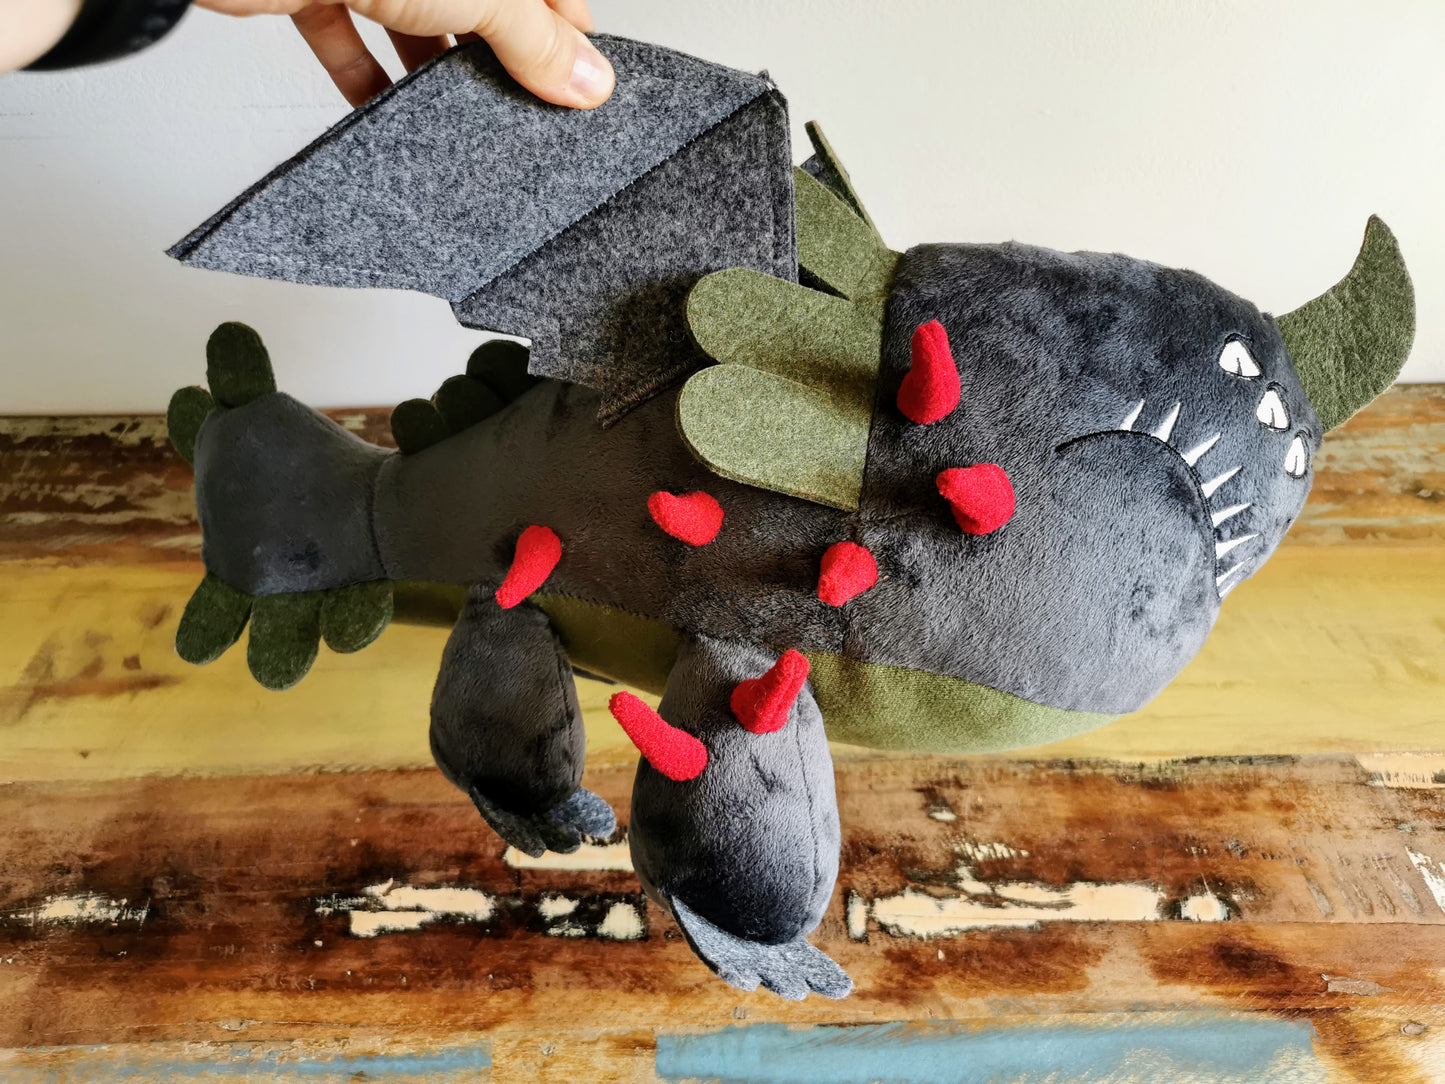 Red Death Dragon plushie, How to Train Your Dragon replica plush, cute plush dragon, custom plush from photo 45cm